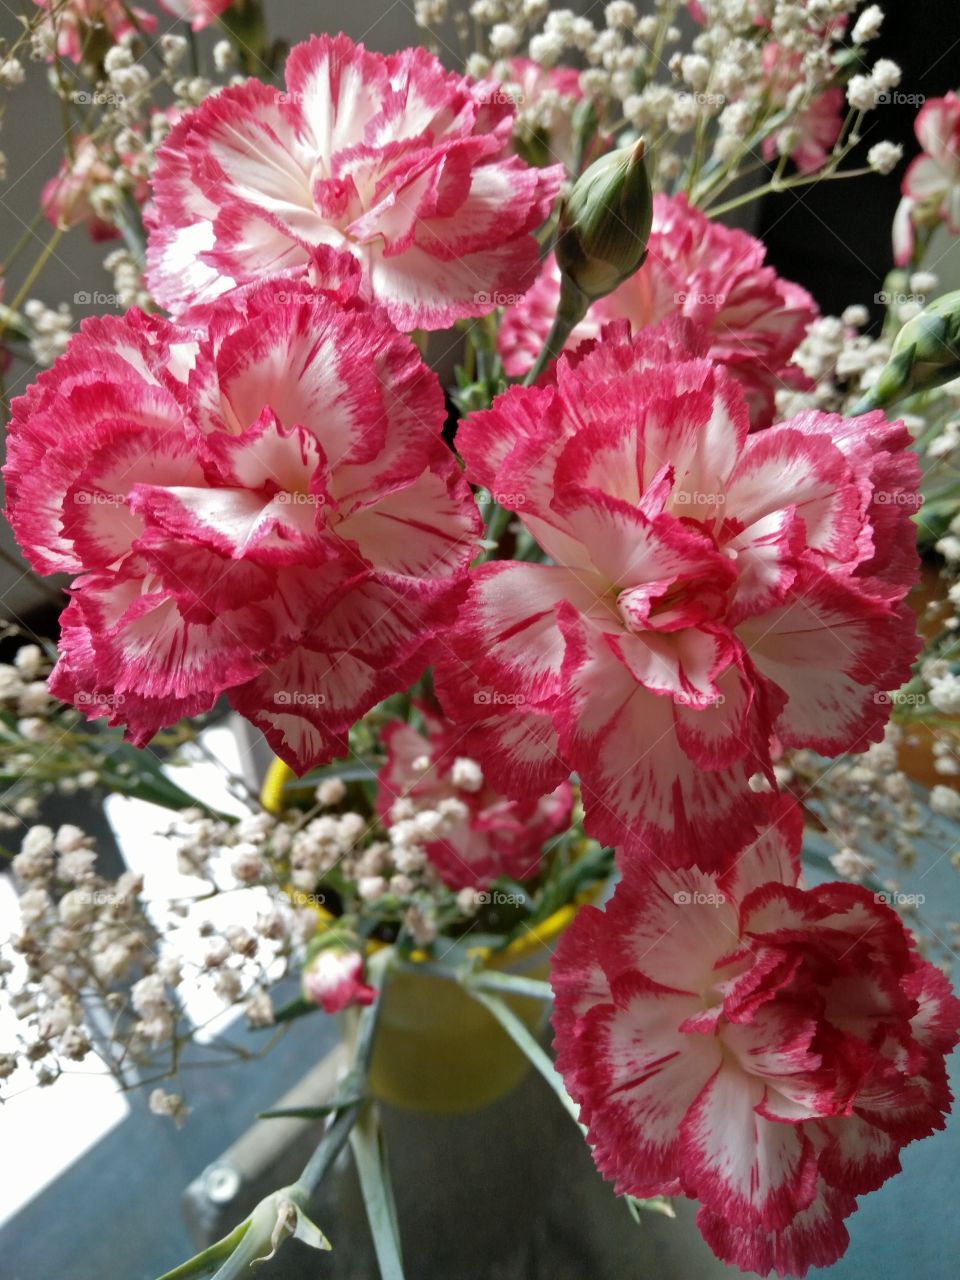 a group of colorful pink and white carnations flowers in bloom in springtime